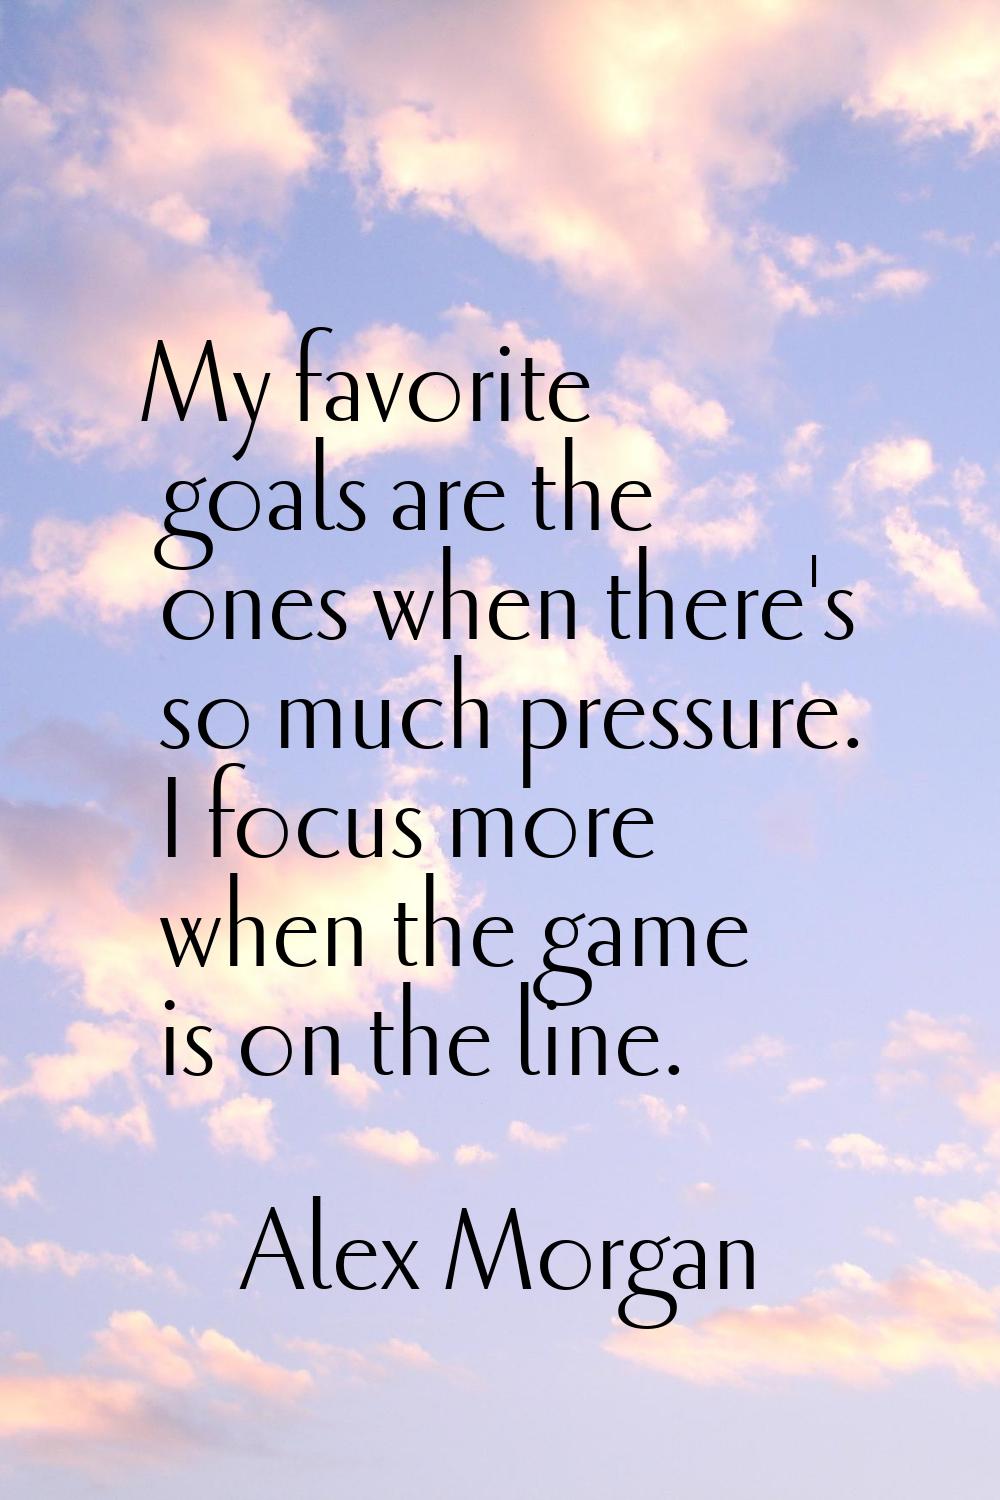 My favorite goals are the ones when there's so much pressure. I focus more when the game is on the 